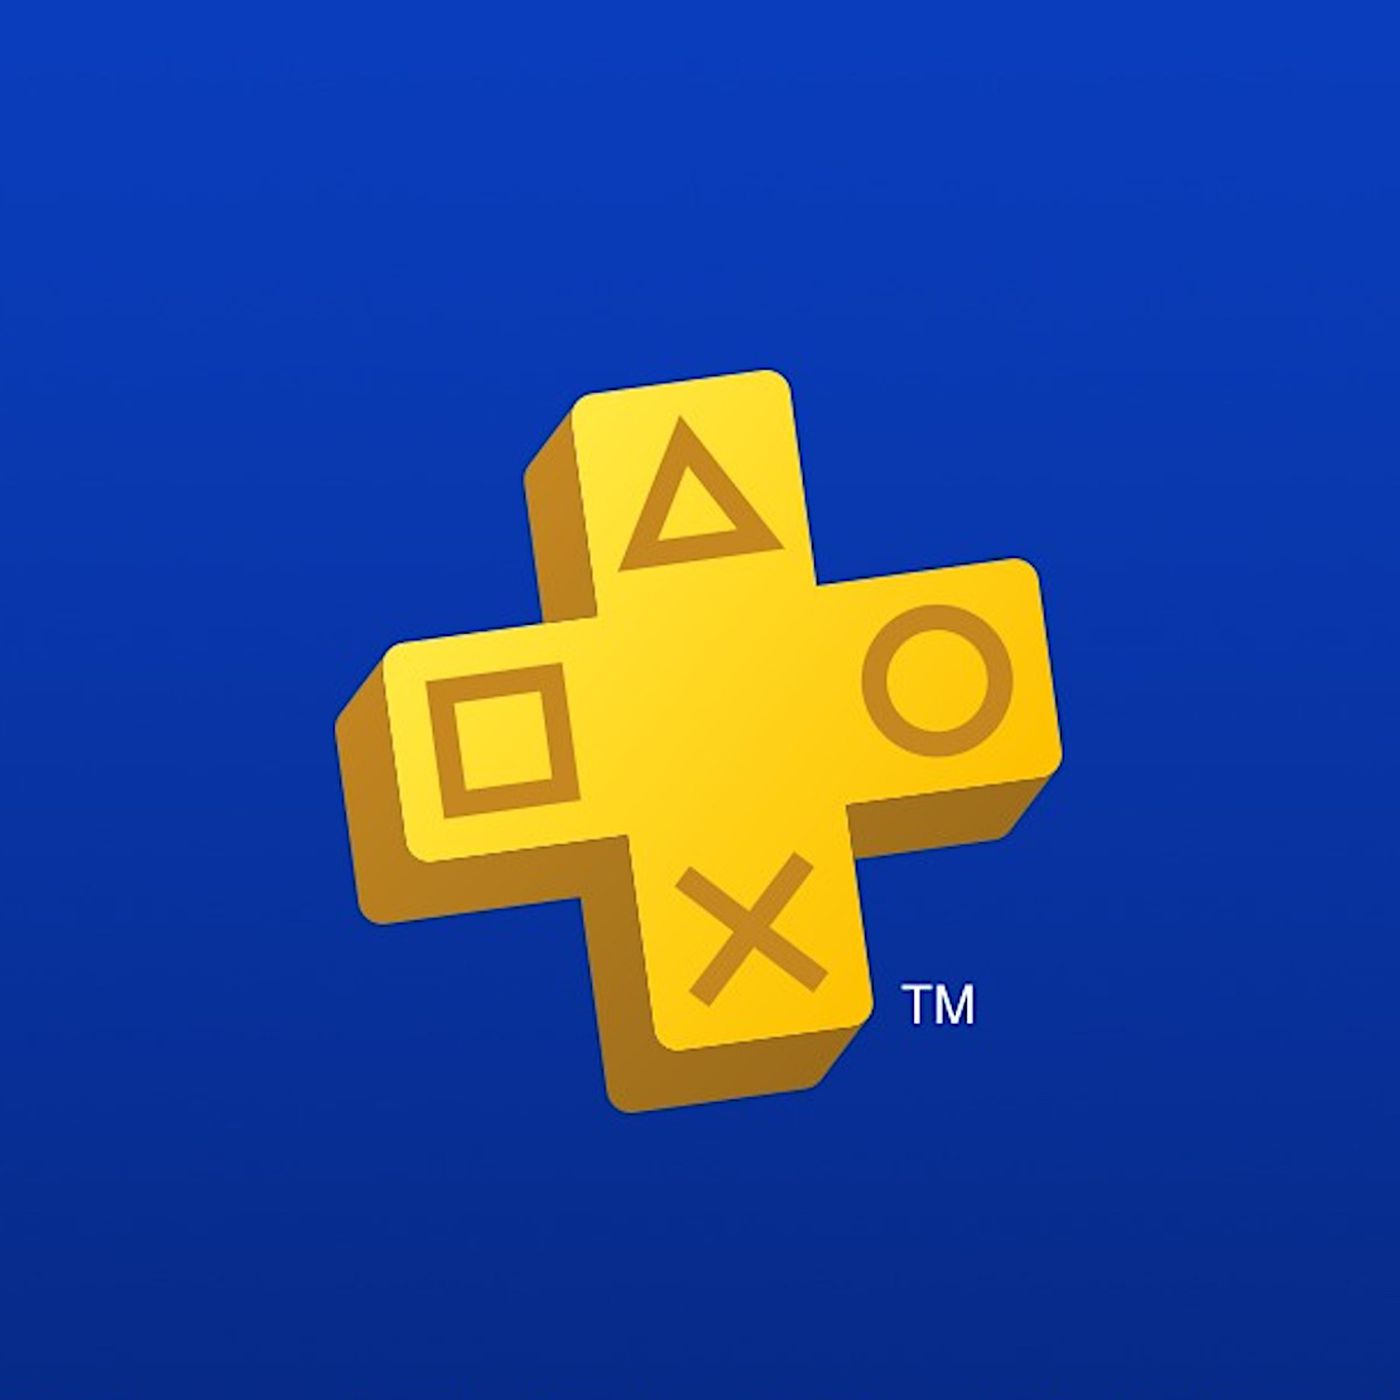 Afbestille antage Garanti Sony announces new PlayStation Plus Extra and Premium tiers, adds PS Now  streaming - Polygon